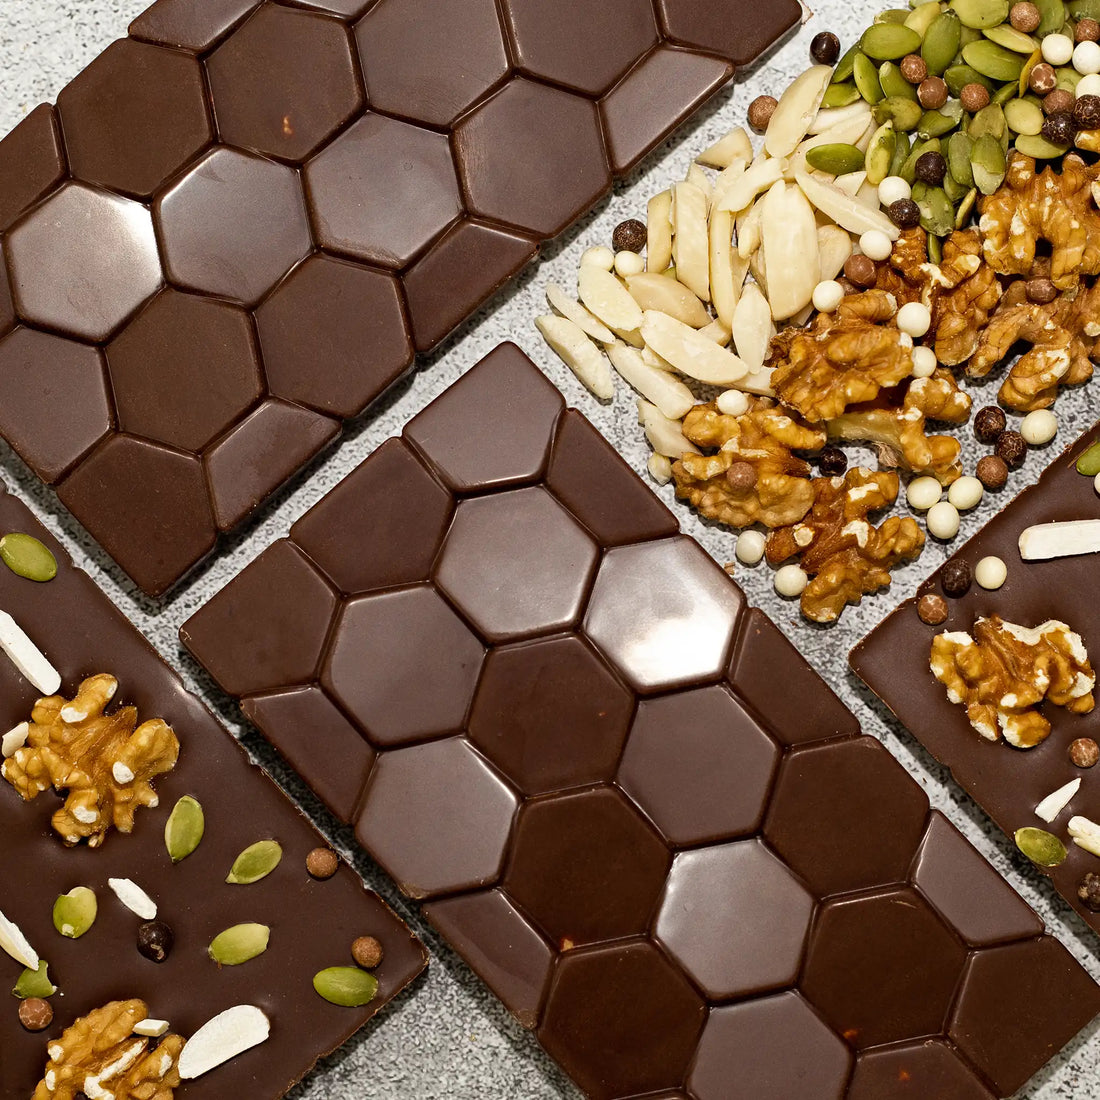 Symphony - Milk Chocolate Bar showing front hexagon pattern and back with walnuts, pumpkin seeds, and almonds